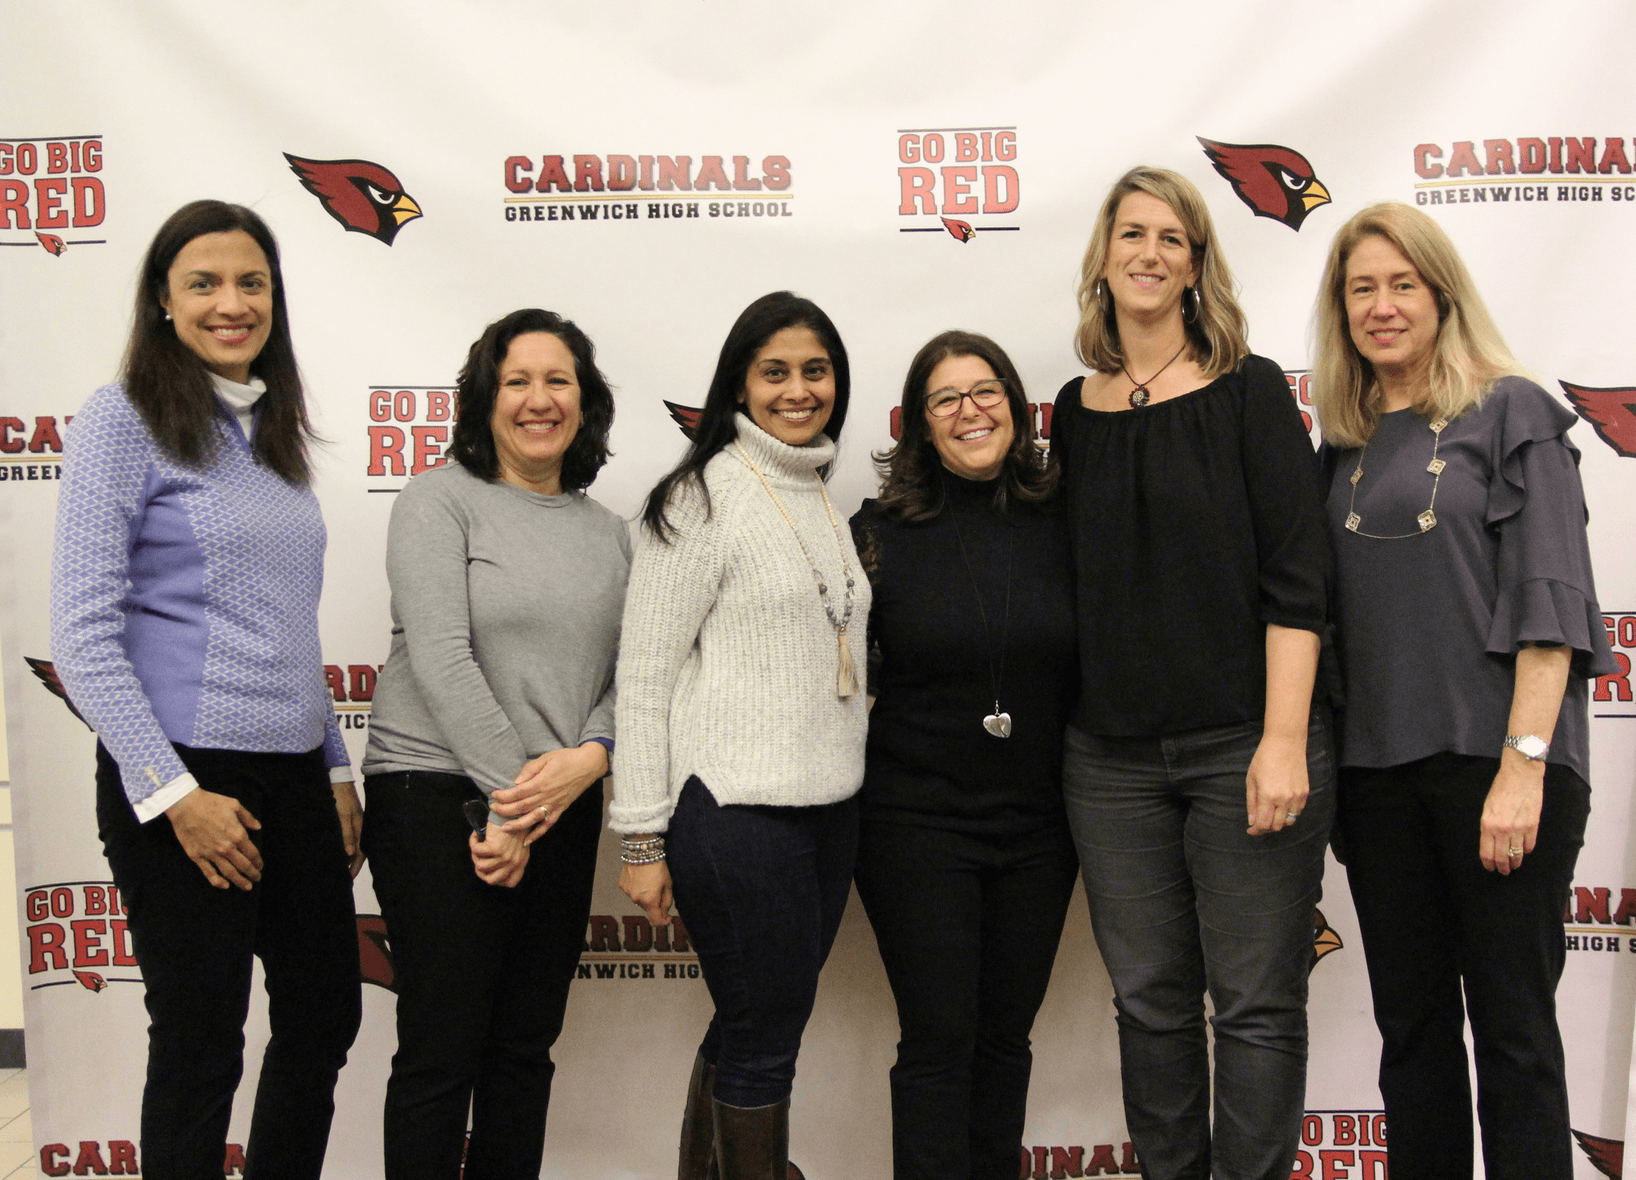 Some of the GHS PTA parents who organized the event in the Galleria before SRO on March 9, 2018. Photo: Leslie Yager